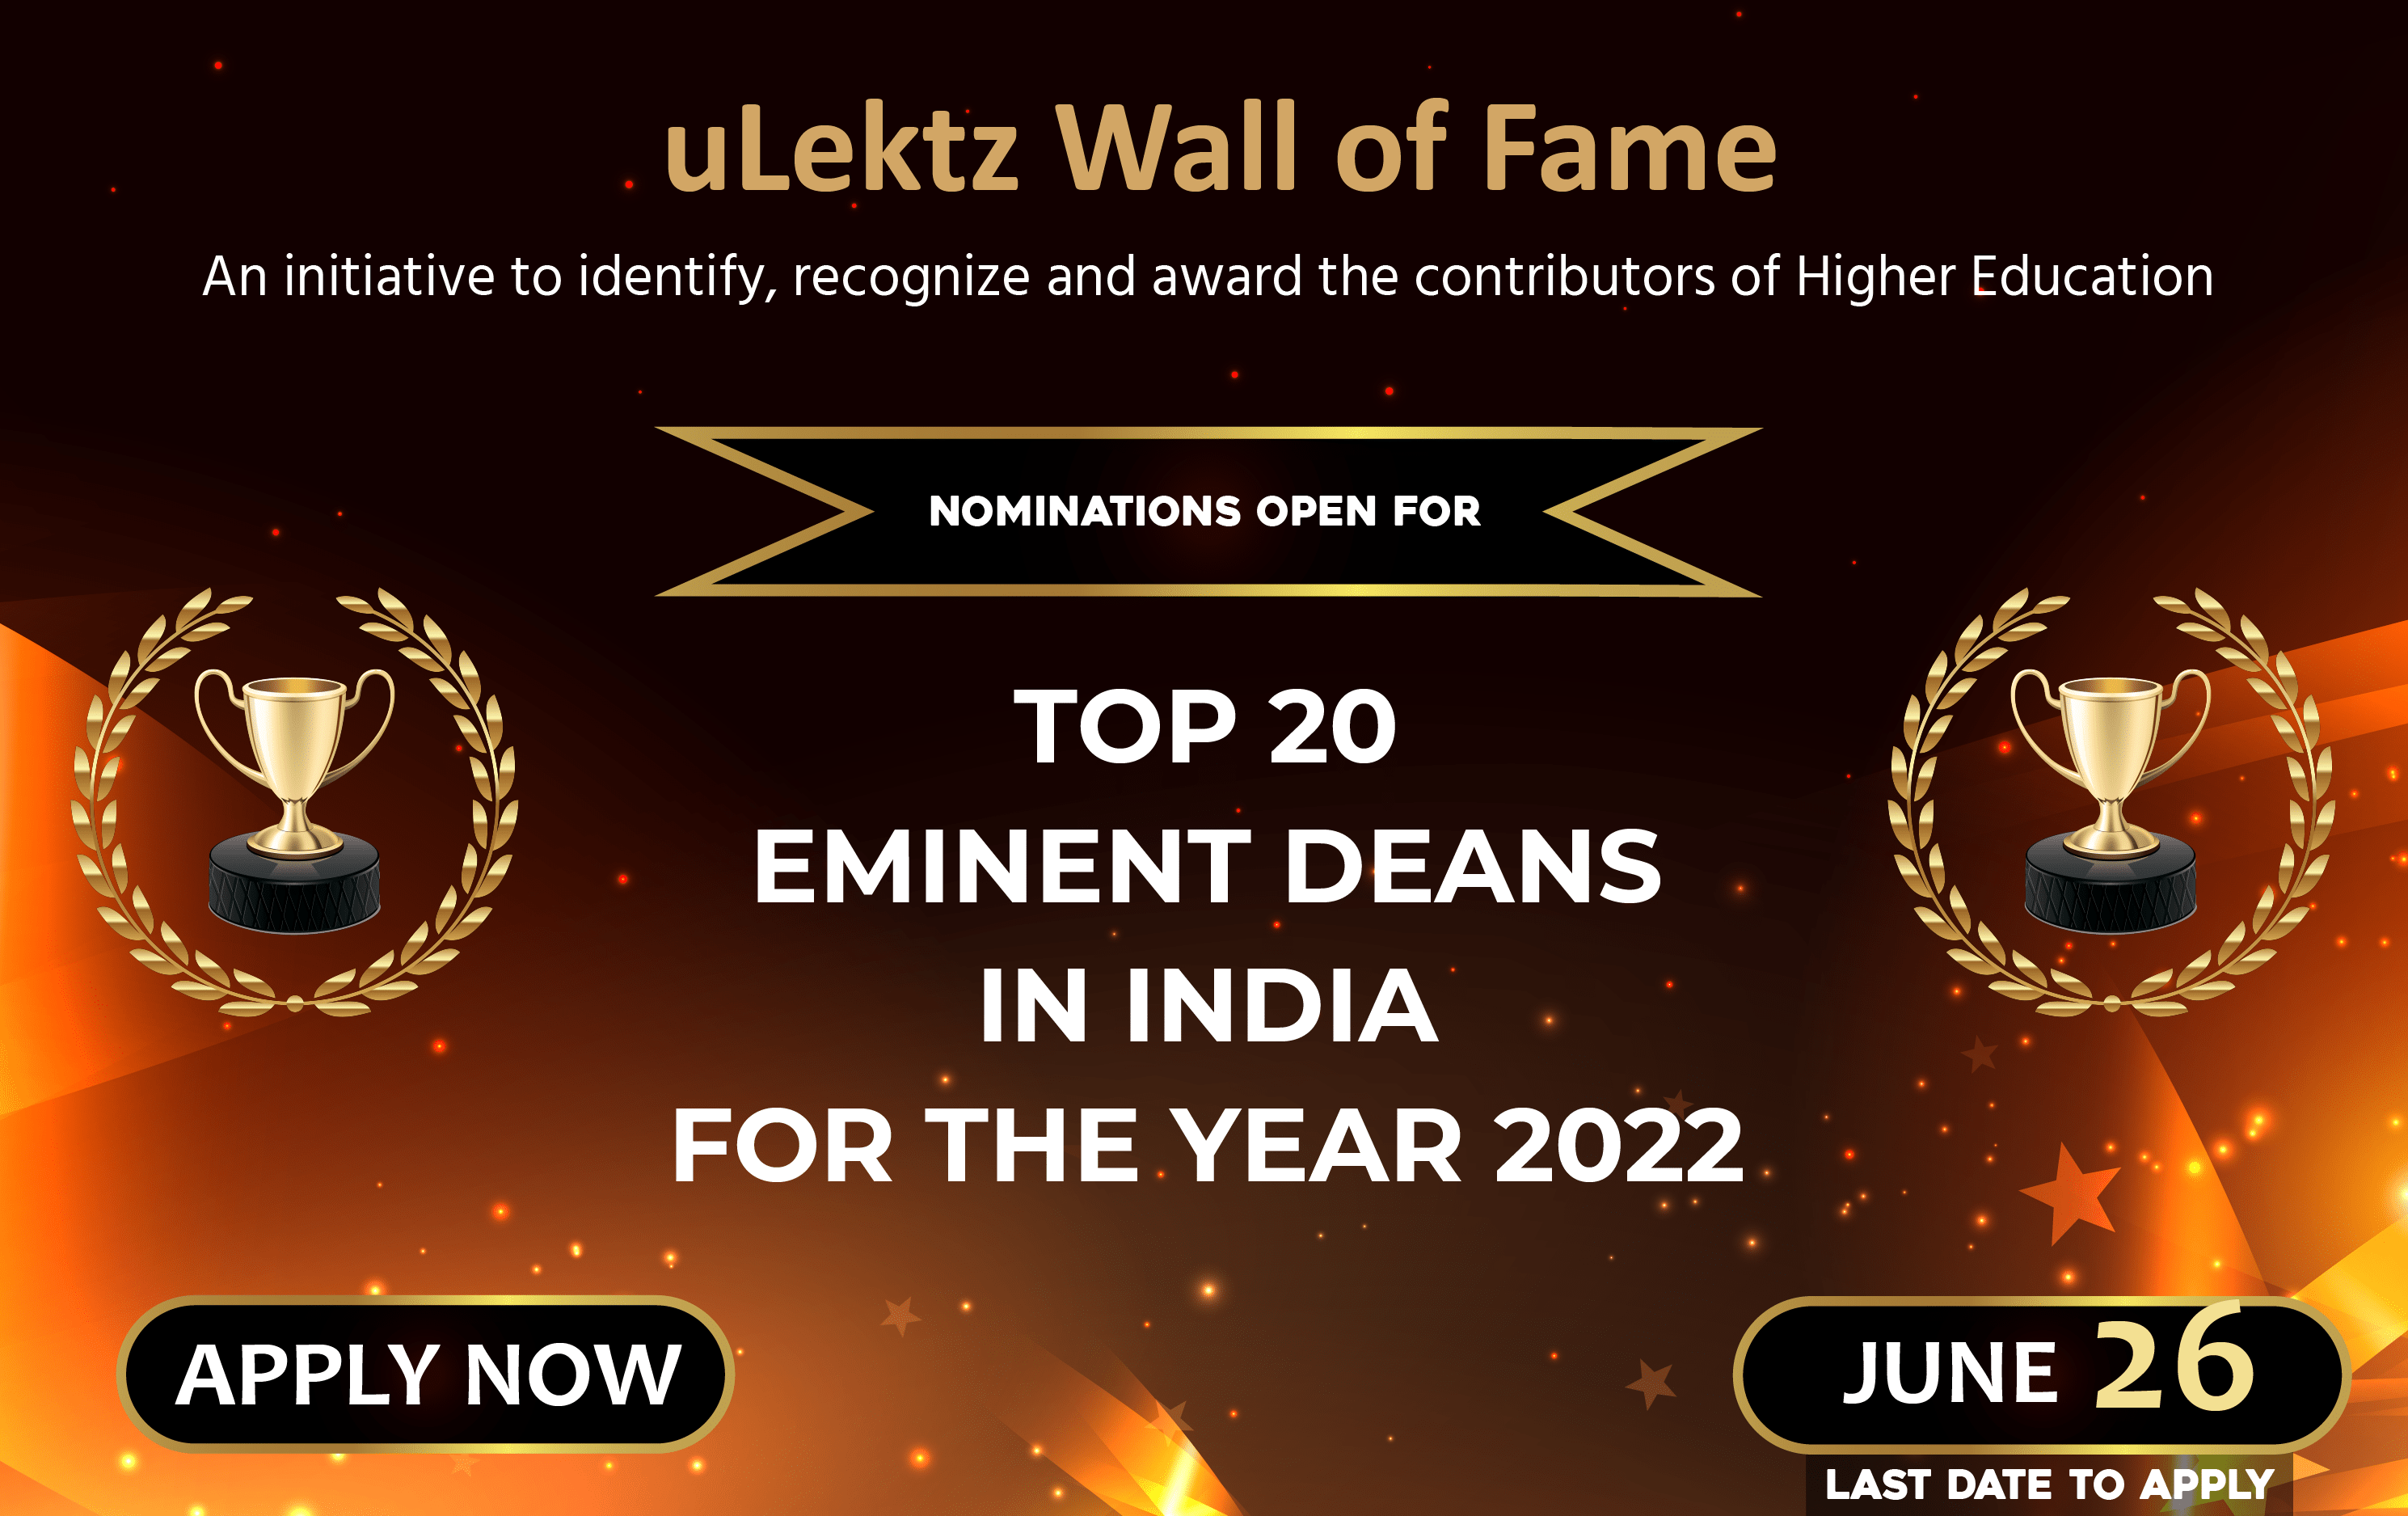 uLektz Wall of Fame will be honouring “Top 20 Eminent Deans in India” for the year 2022